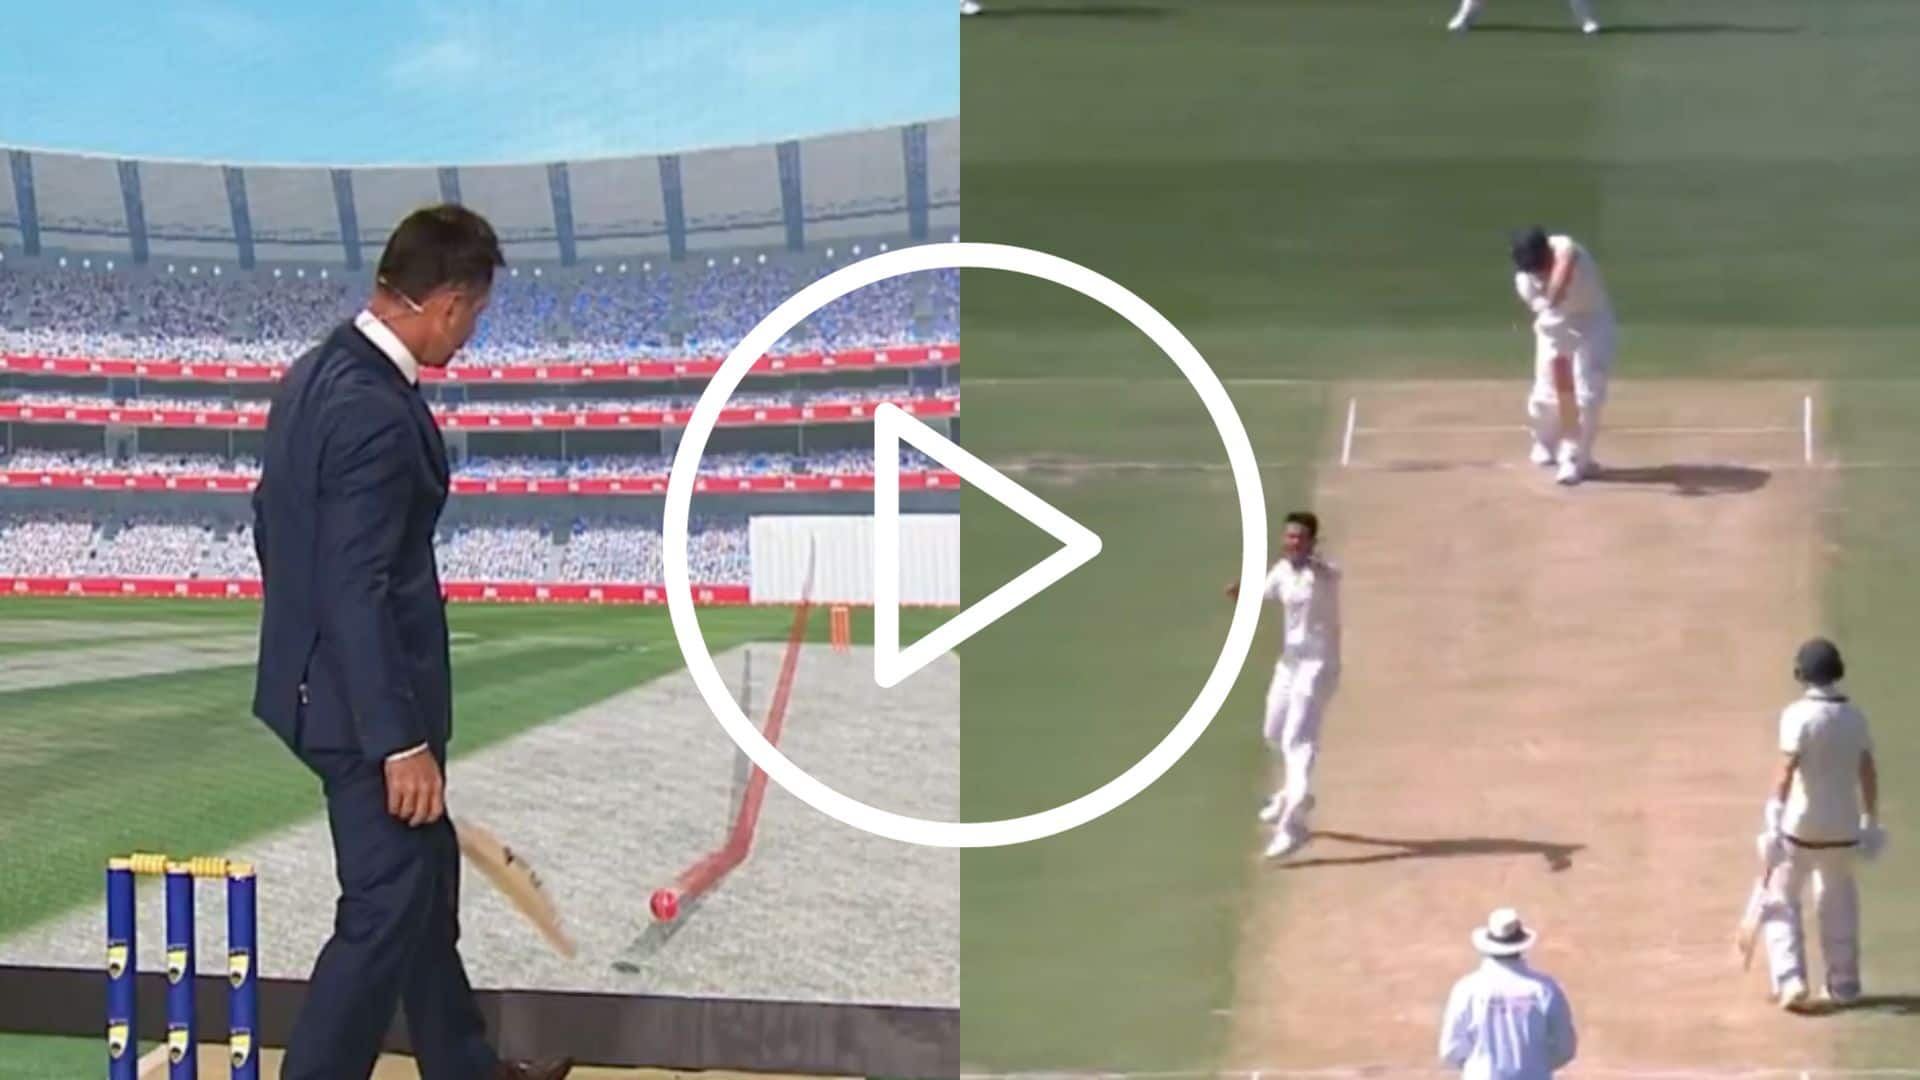 [Watch] Ricky Ponting Predicts Accurately As Field Change Plan Gets Mitch Marsh LBW